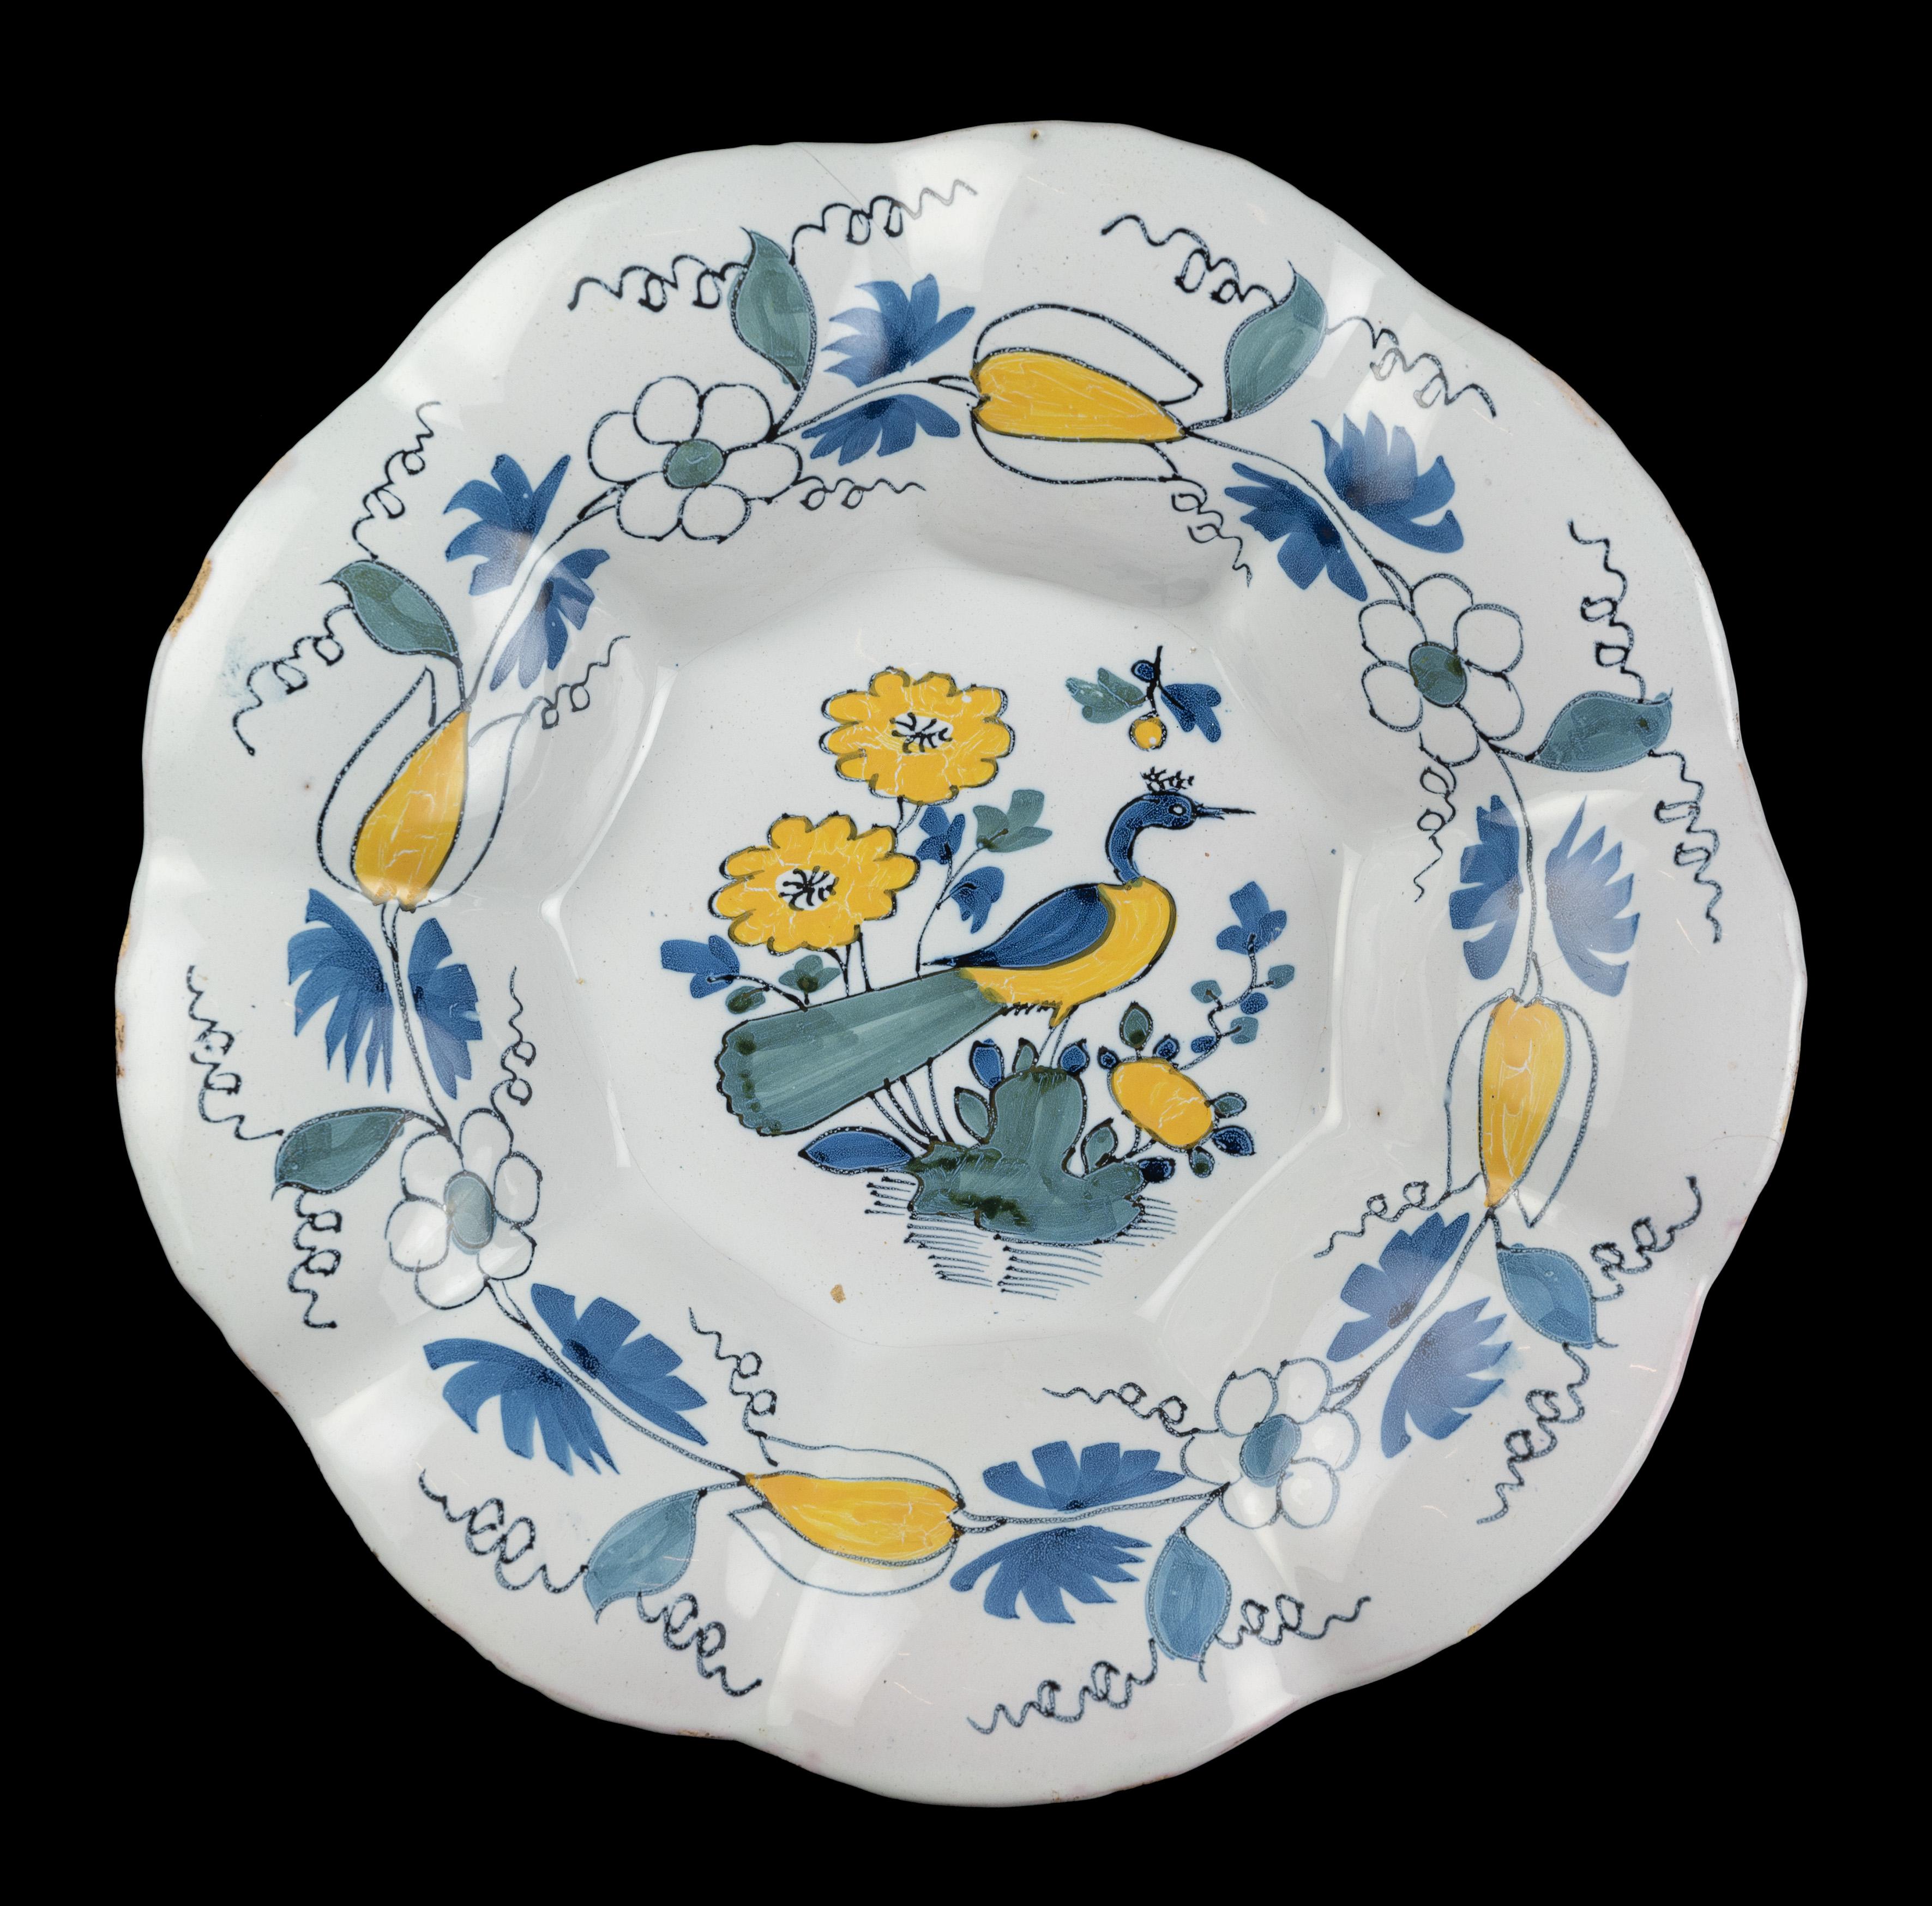 Polychrome lobed dish with peacock. Delft, circa 1680 
Dimensions: diameter 34,7 cm / 13.66 in.

The polychrome lobed dish is composed of nine wide lobes and is painted in the centre with a peacock on a rock in water overgrown with flowers and